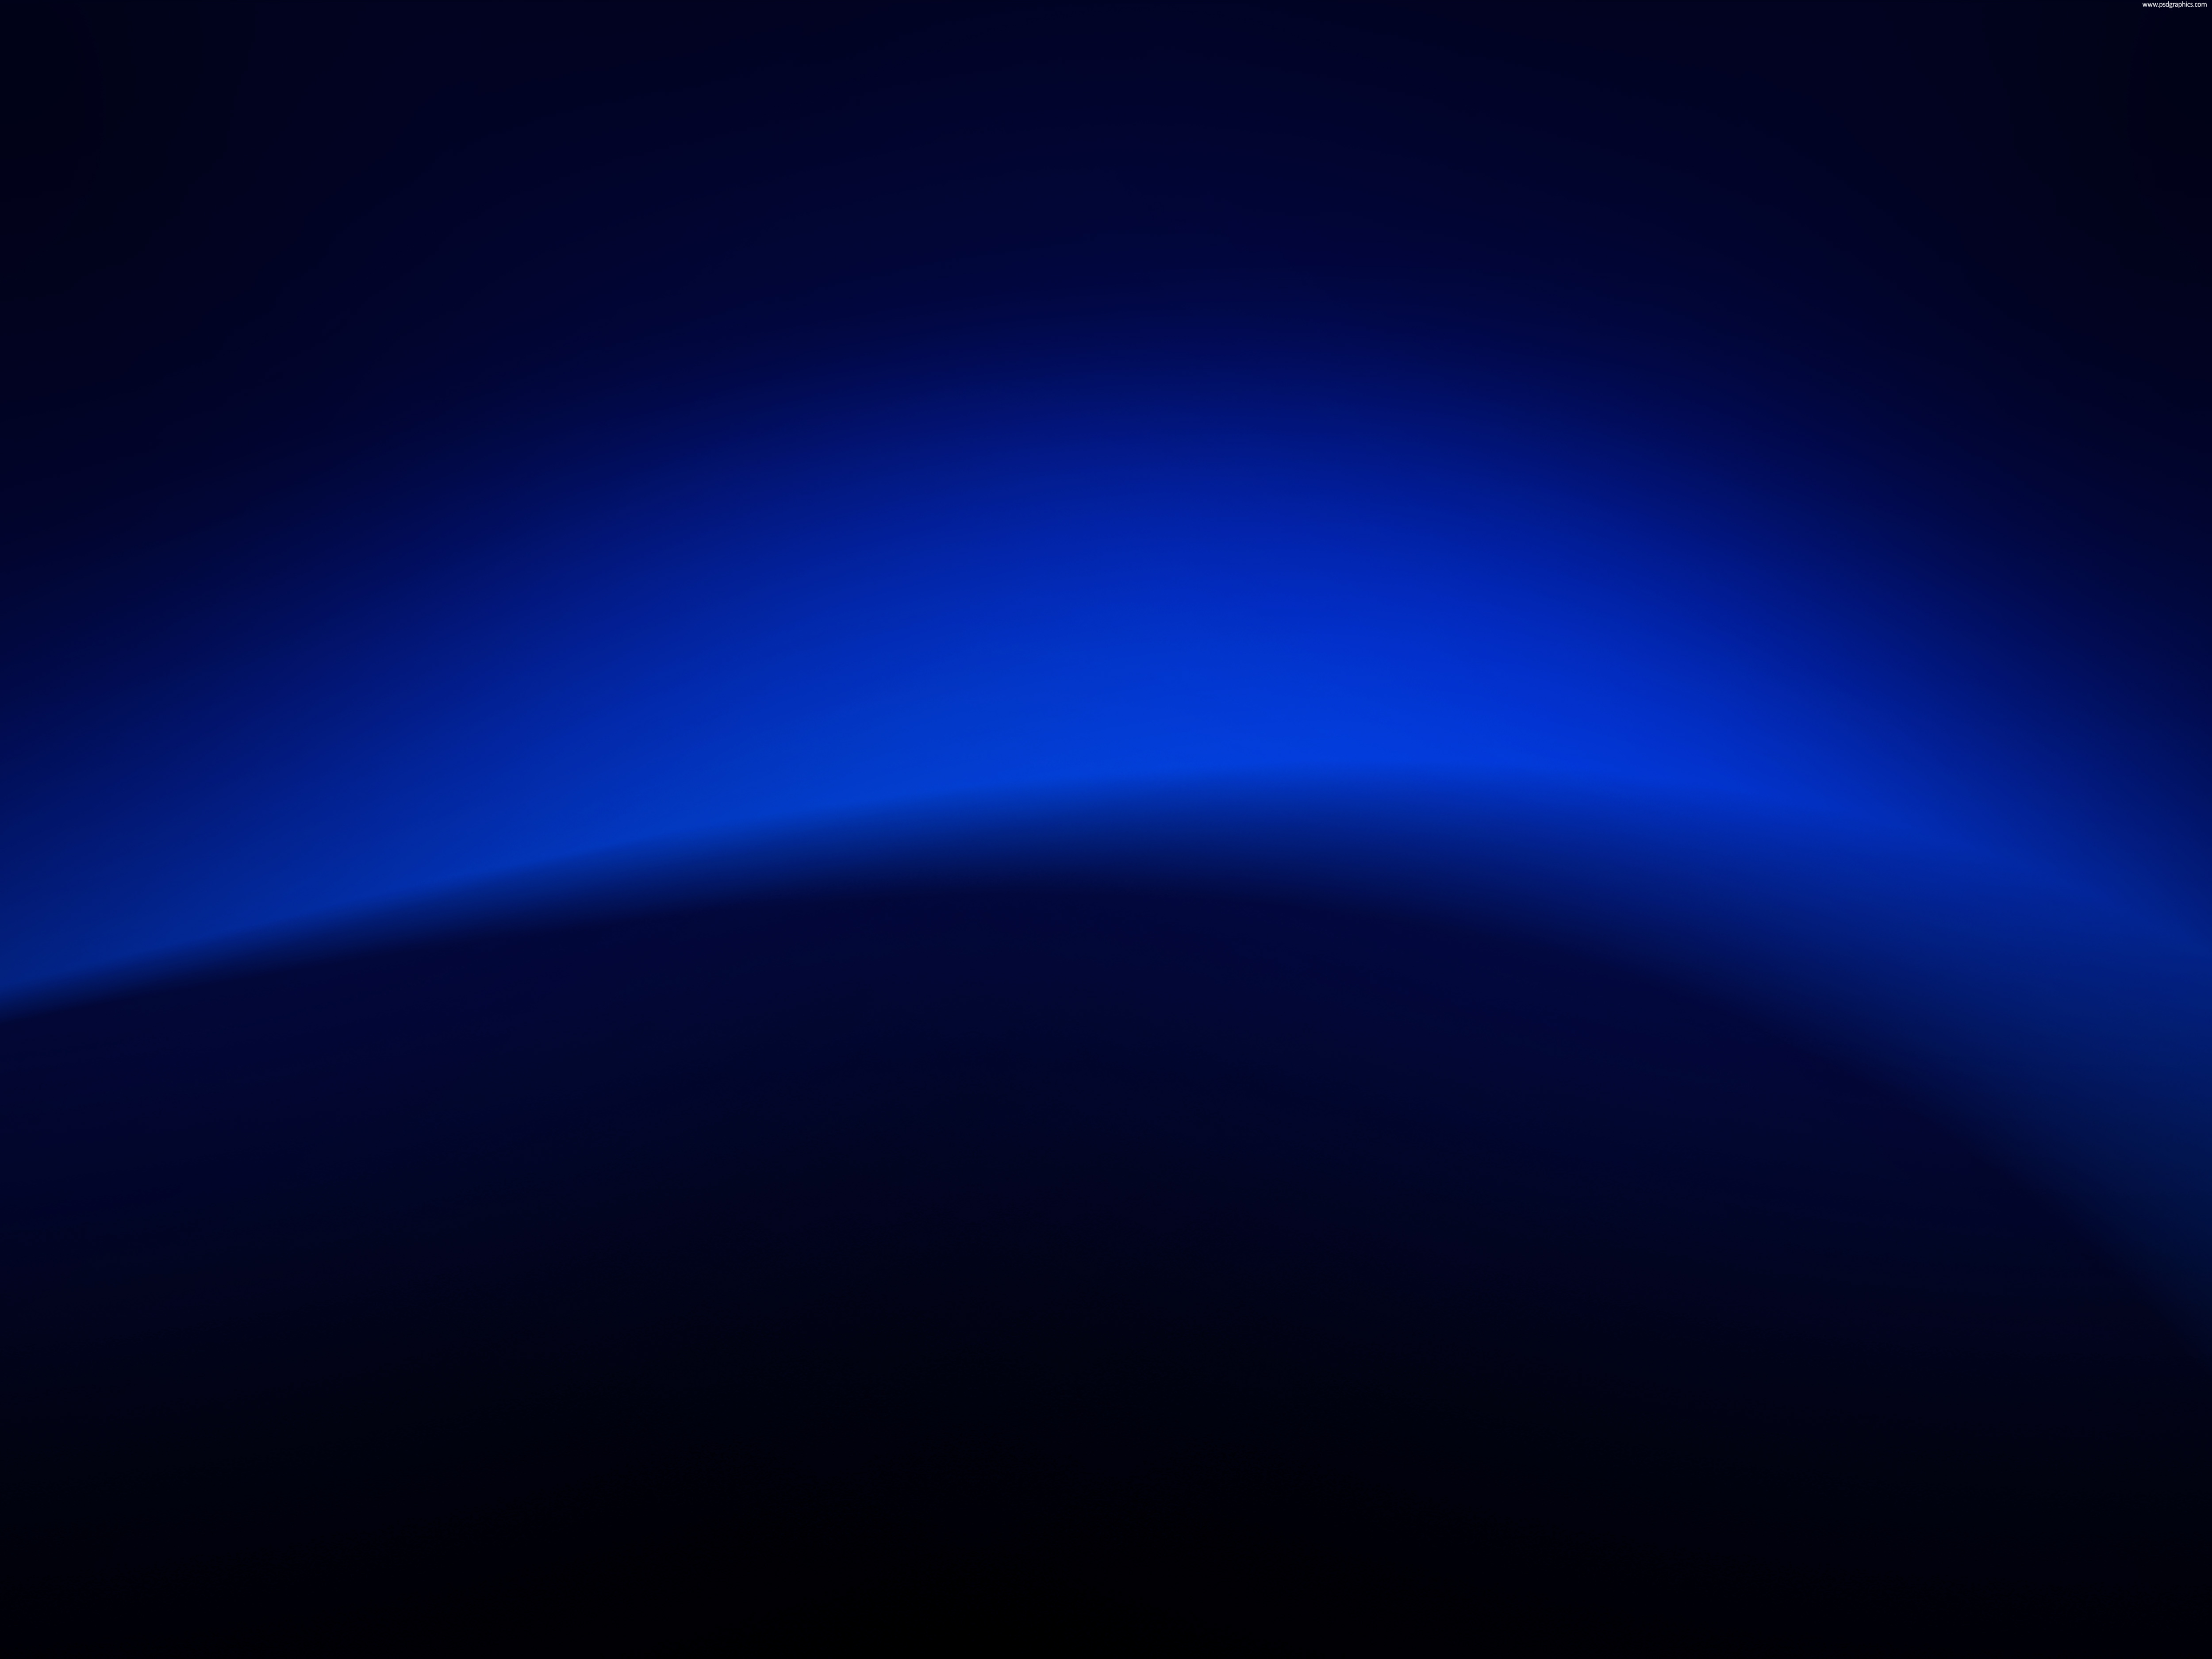 Blue ray background psdgraphics Black Background and some PPT 5000x3750